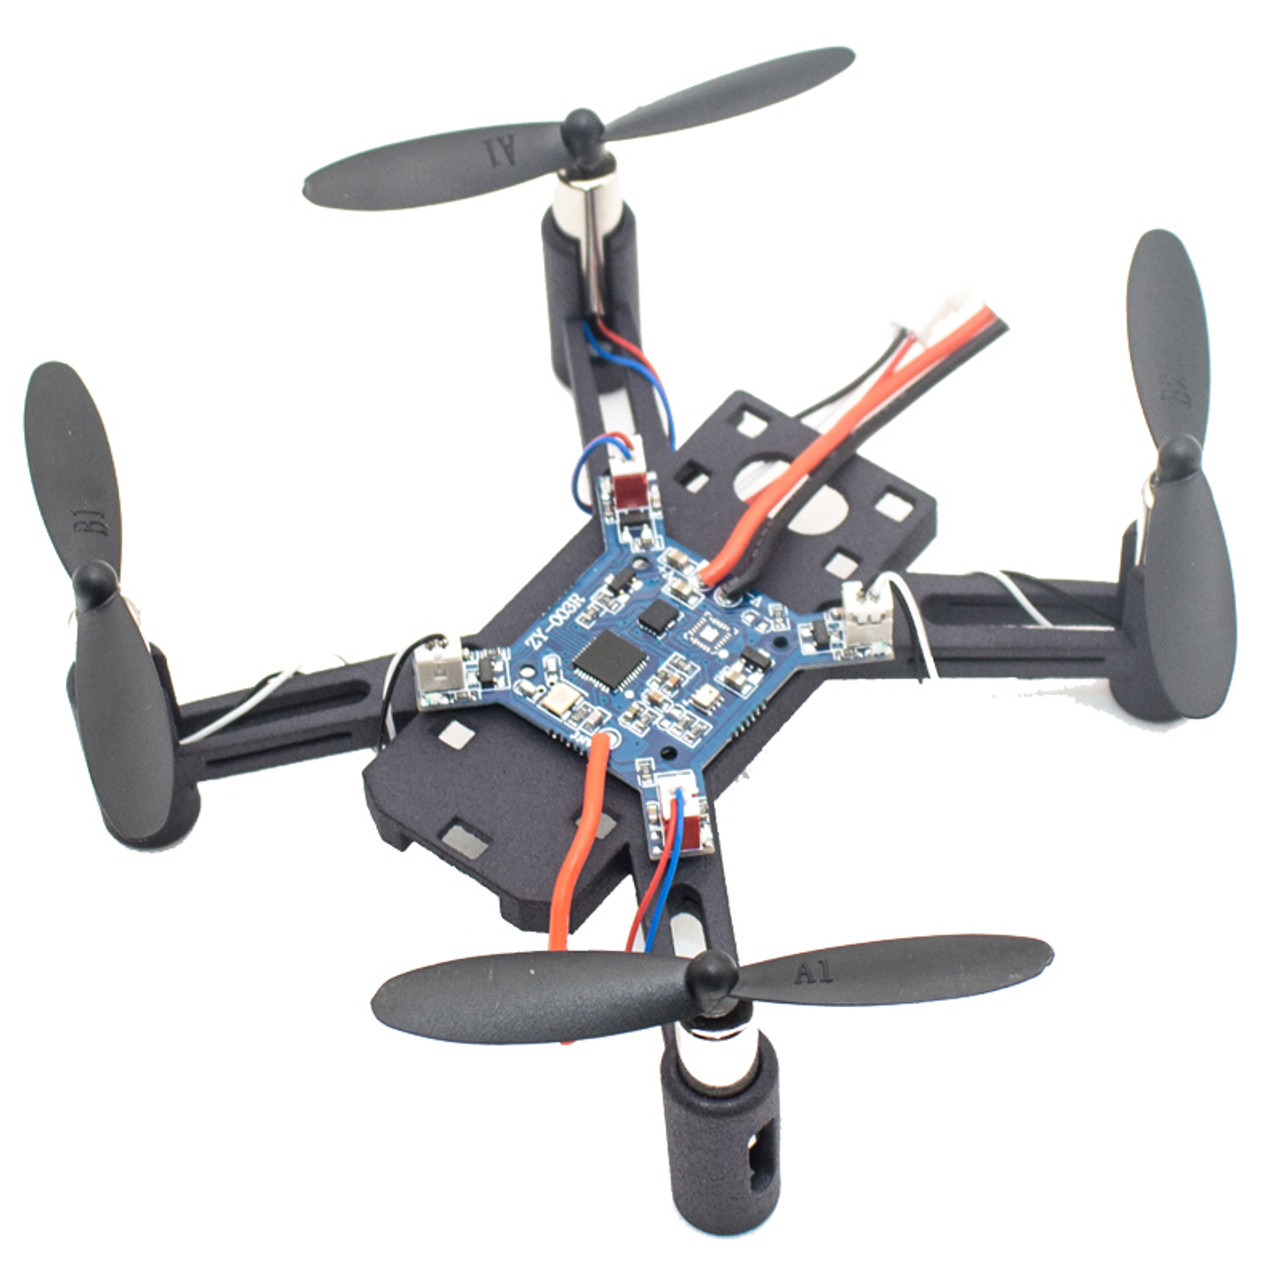 DIY drone assembly kit for how to make a drone for beginners